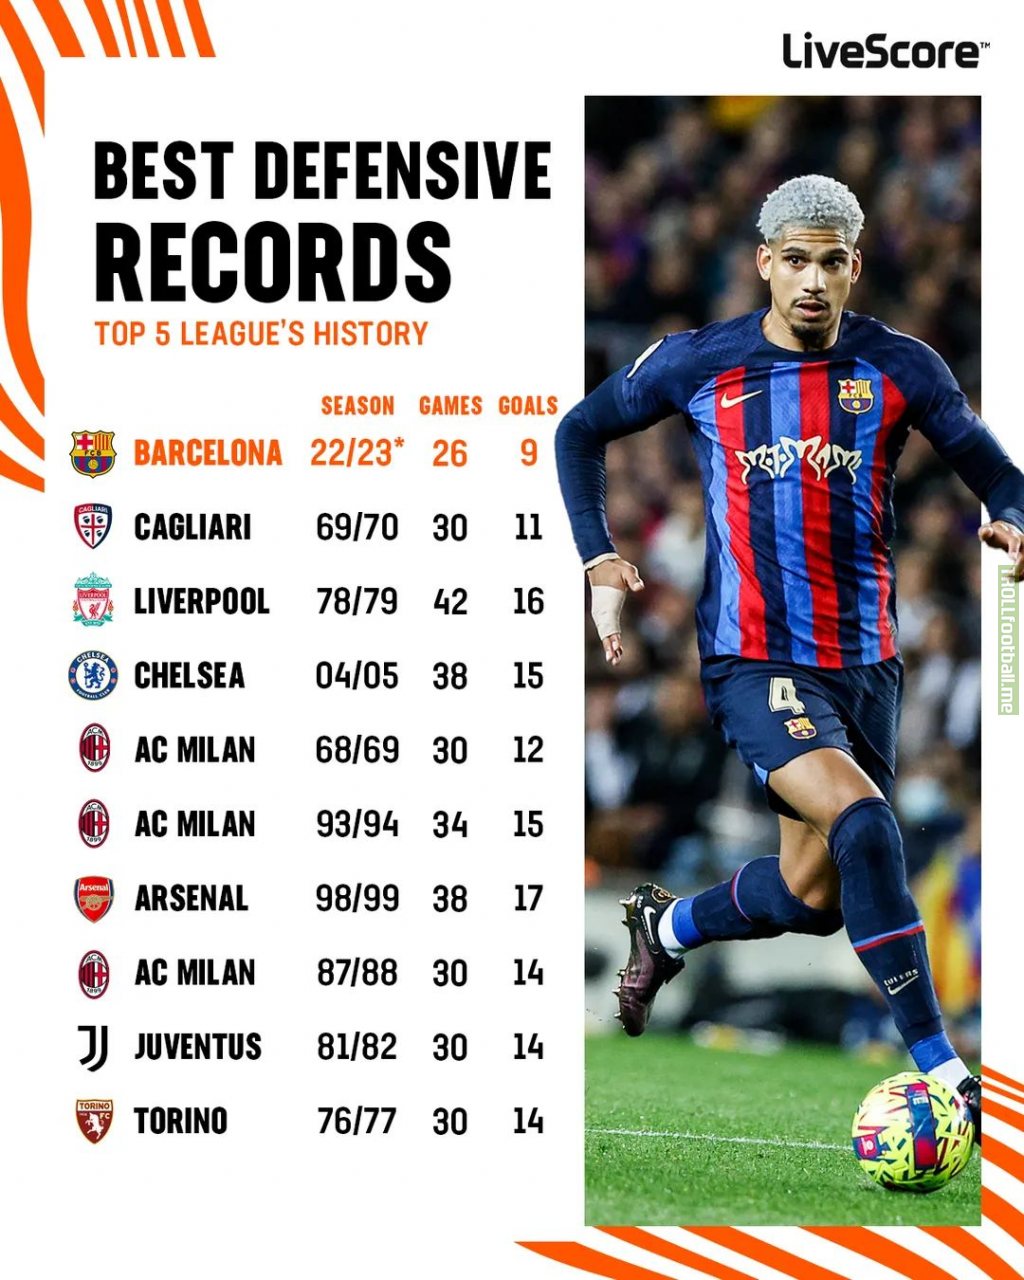 [Livescore] The best defensive records in the top 5 leagues' history